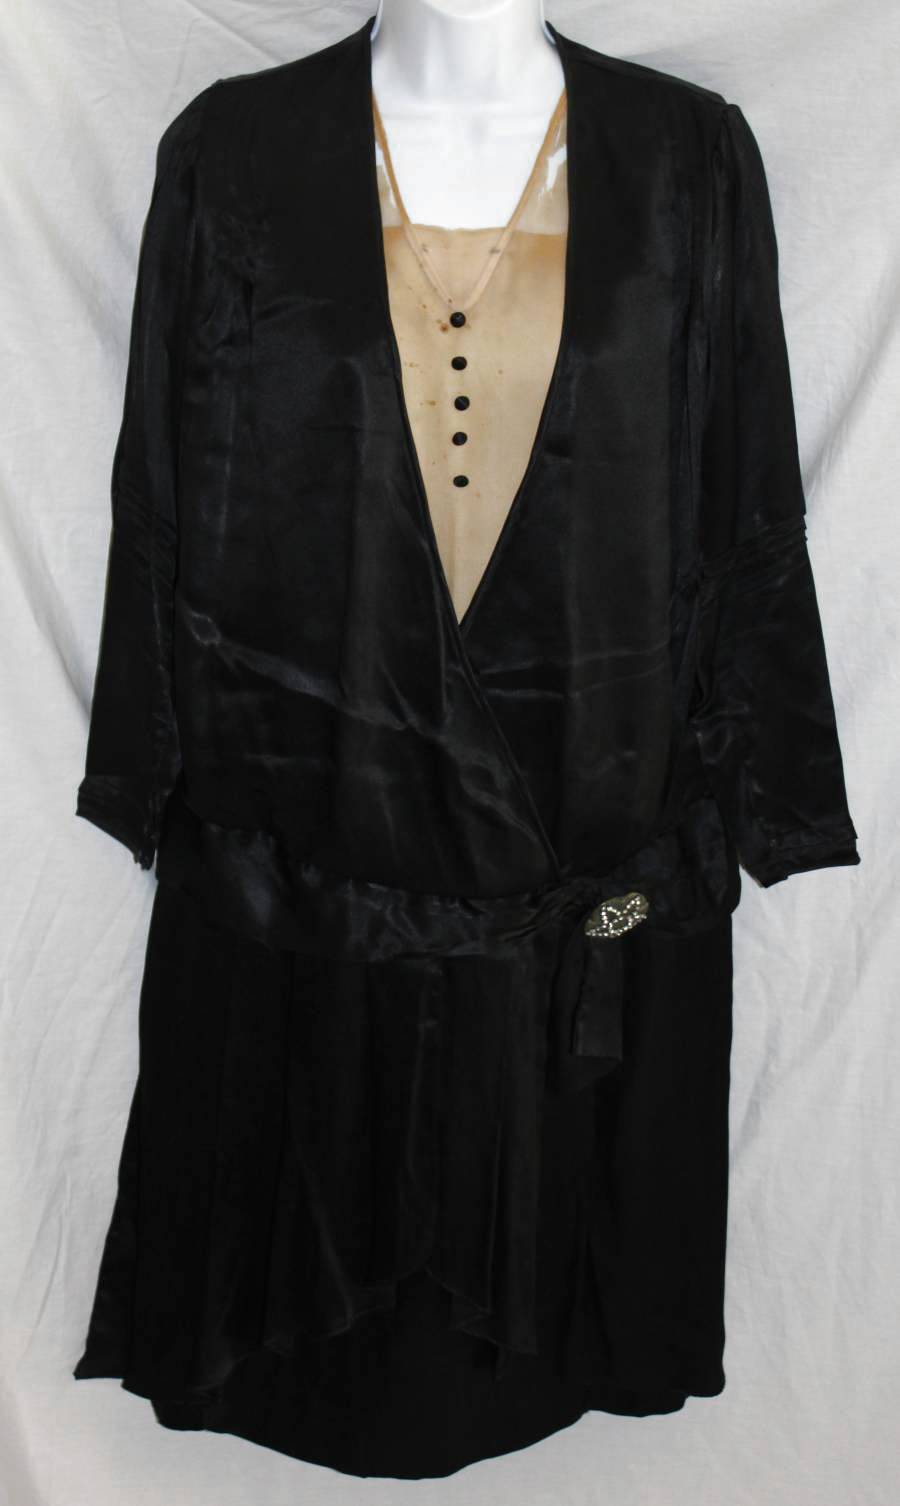 All The Pretty Dresses: Late 1920's (Poss early 30's) Black and Tan Dress